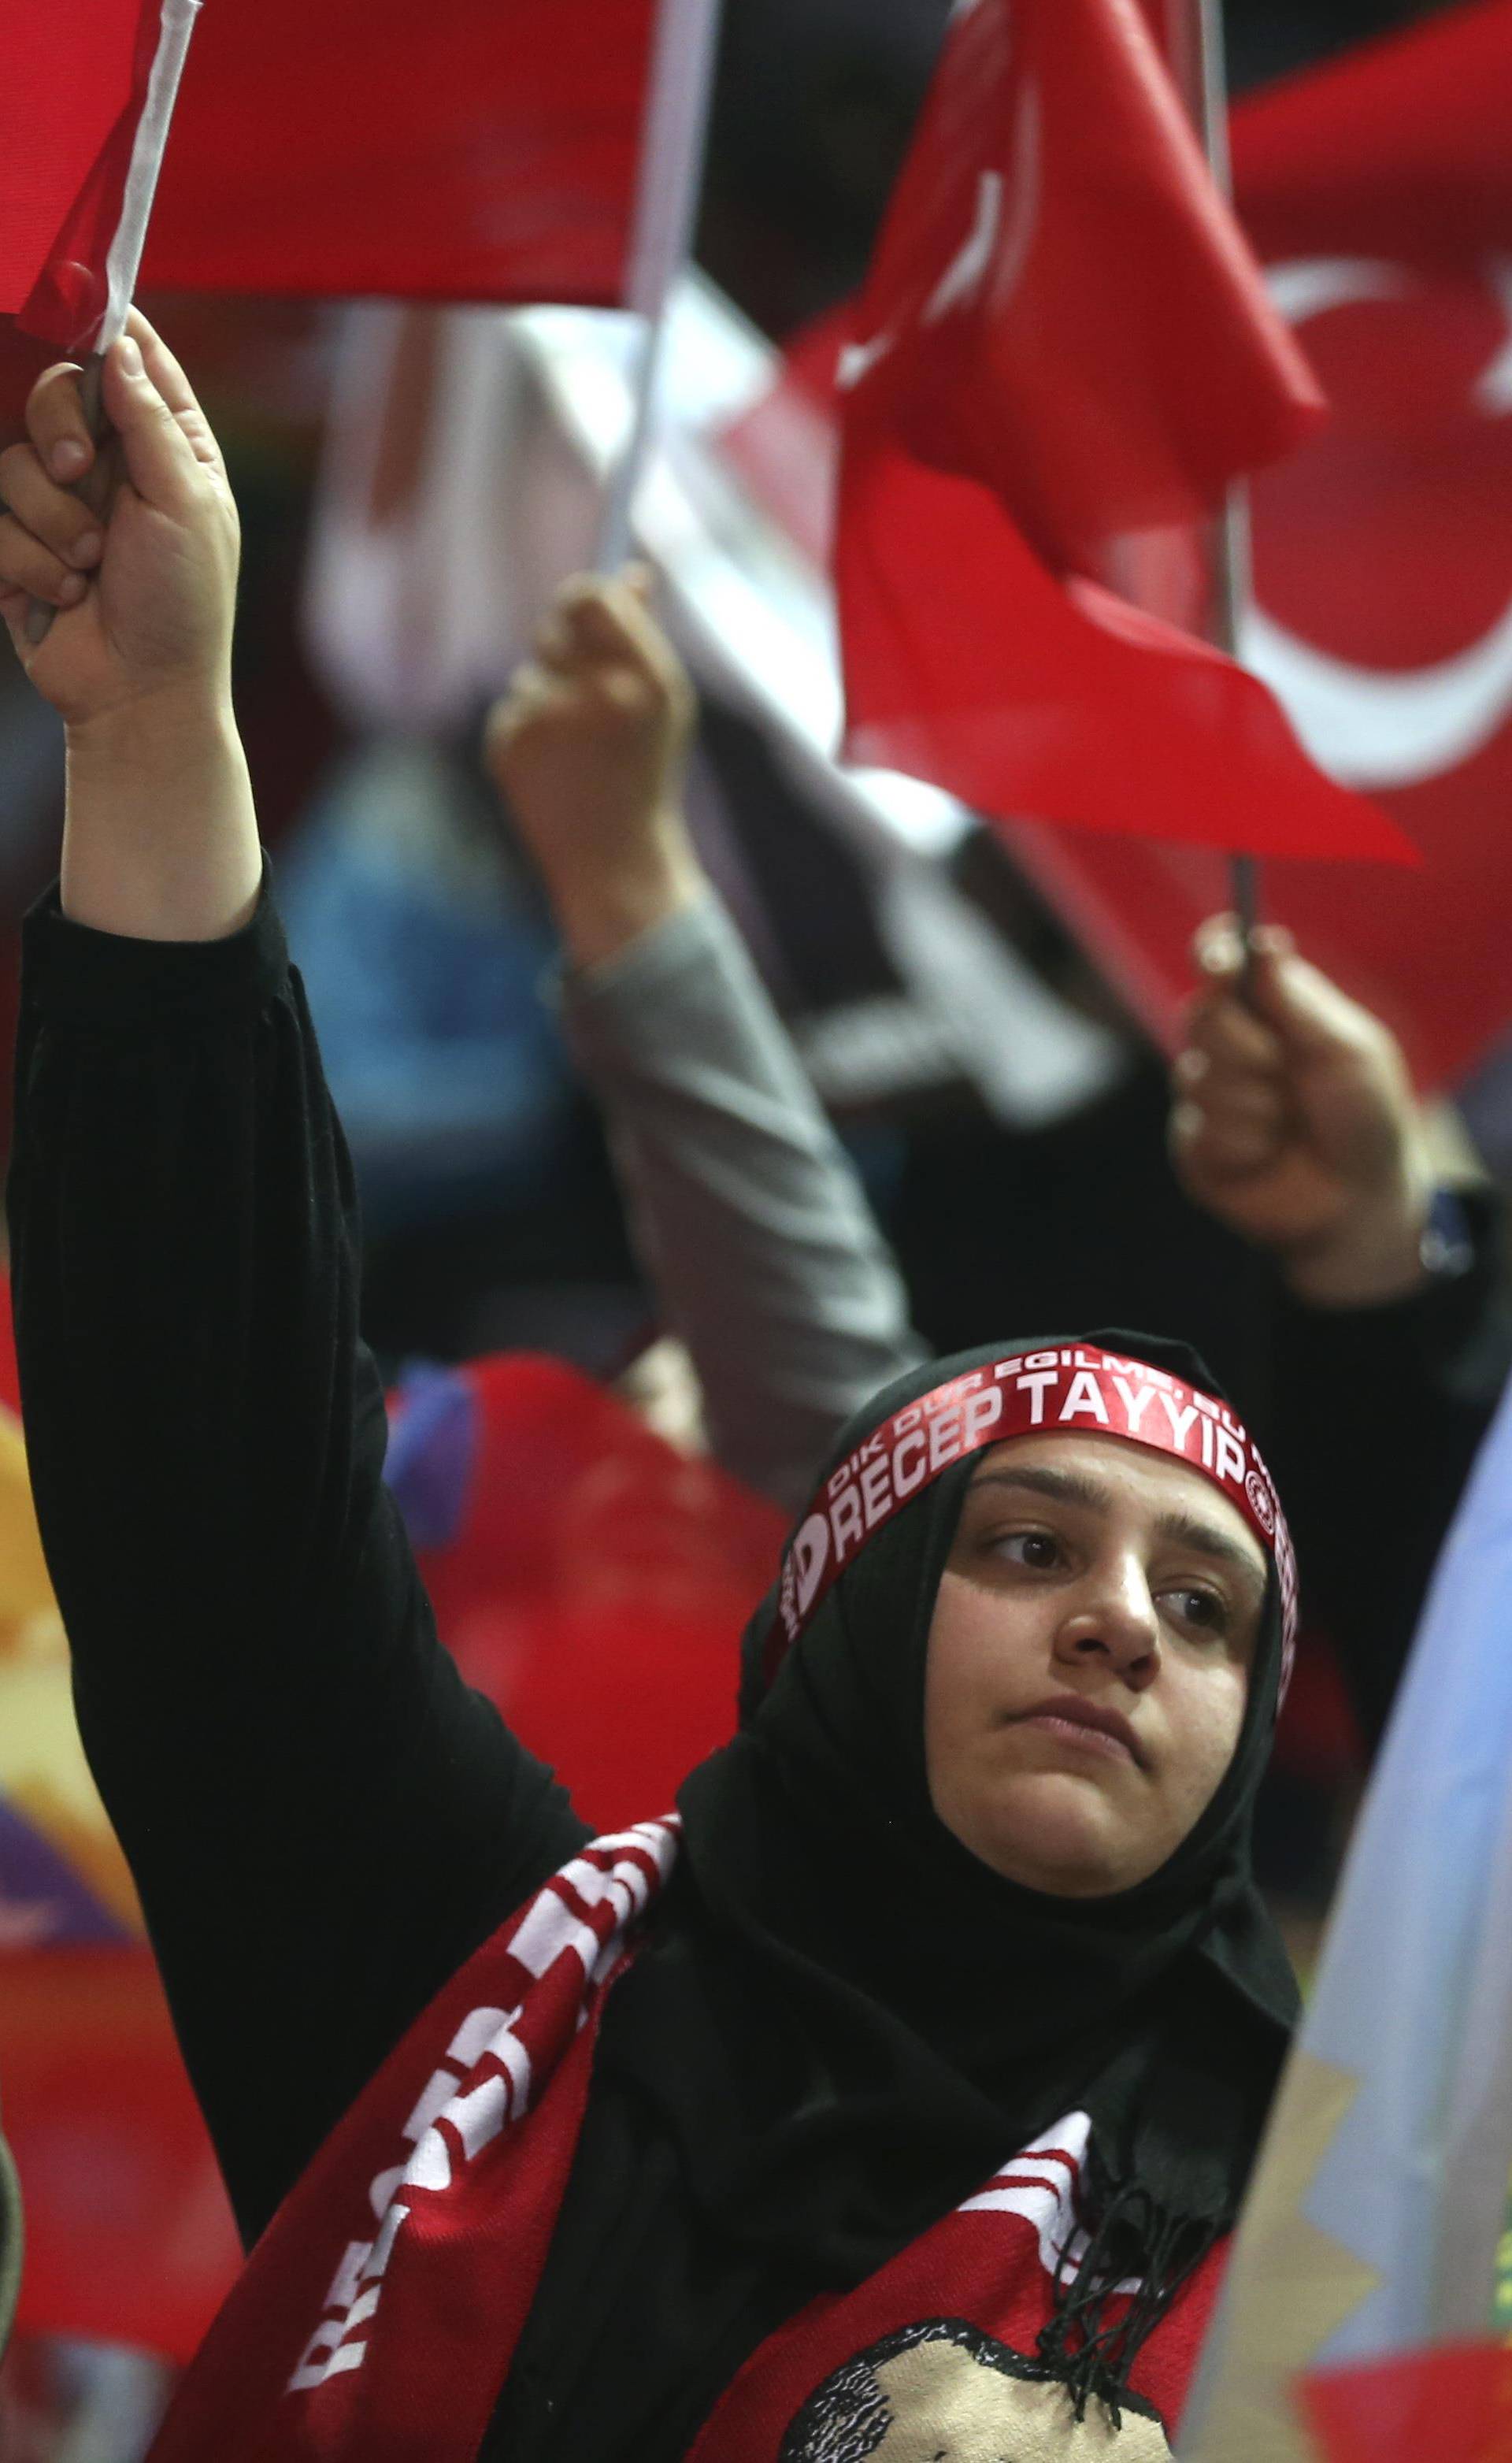 Supporters of Turkish President Erdogan attend a pre-election rally in Sarajevo